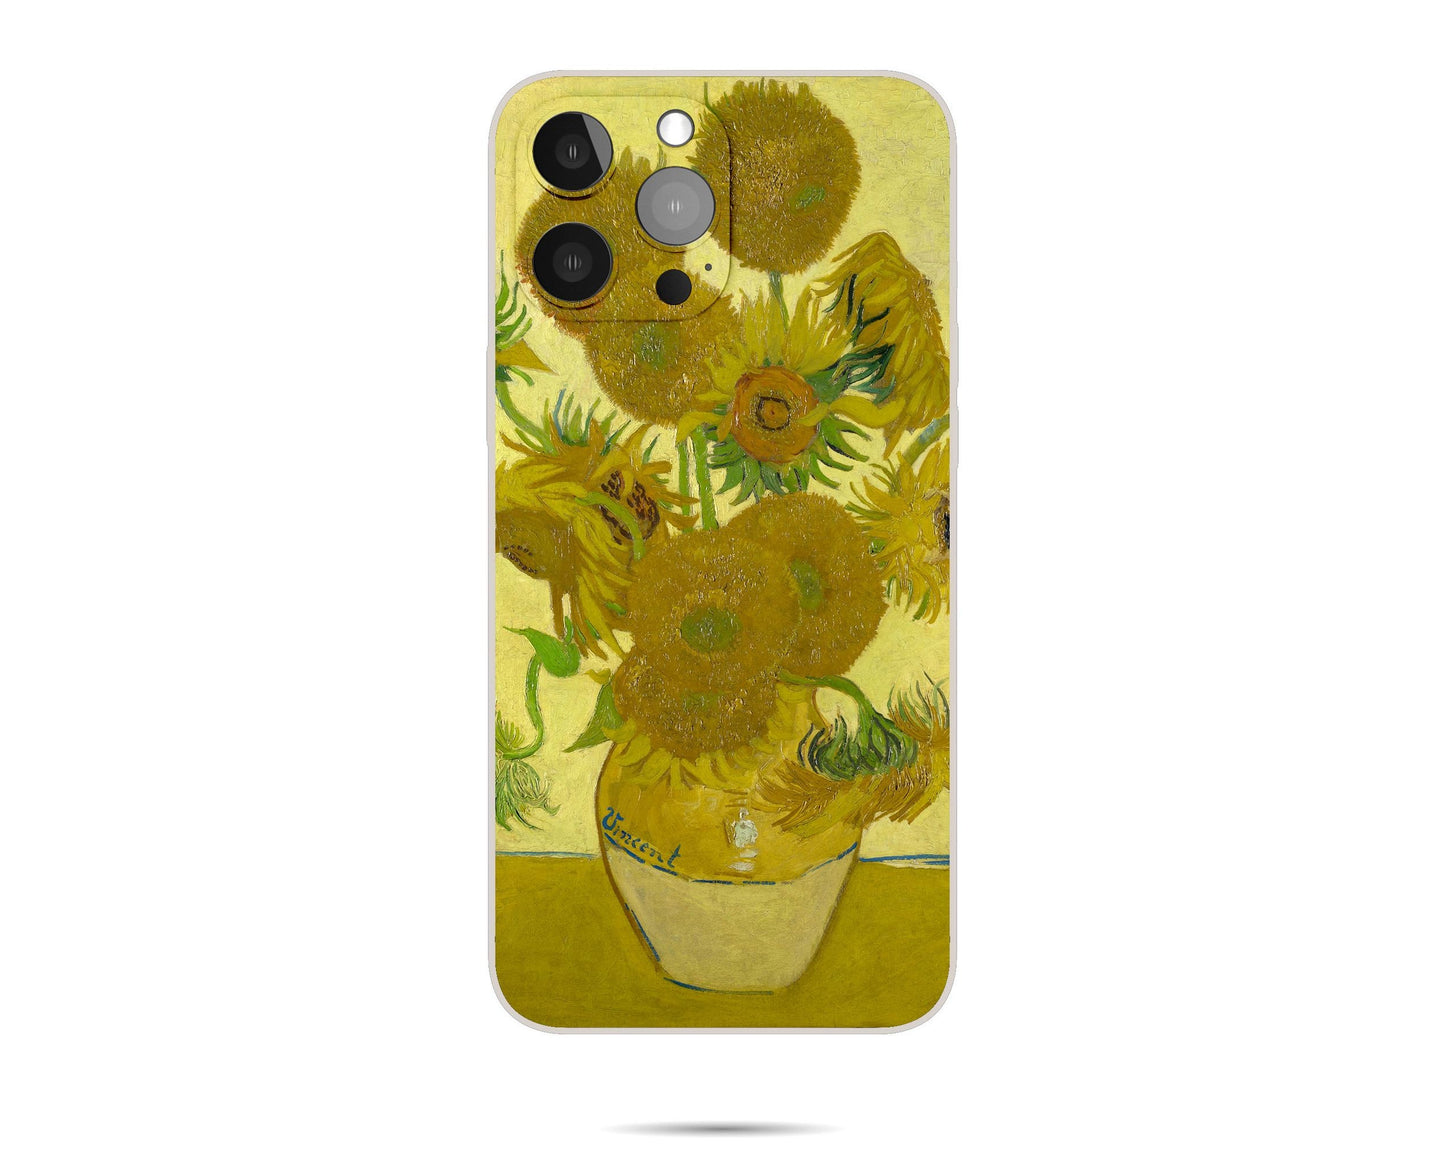 Iphone 14 Pro Case Of Vincent Van Gogh Painting Sunflowers, Iphone 11 Pro Case, Iphone Xs Max, Iphone Protective Case, Iphone Case Silicone